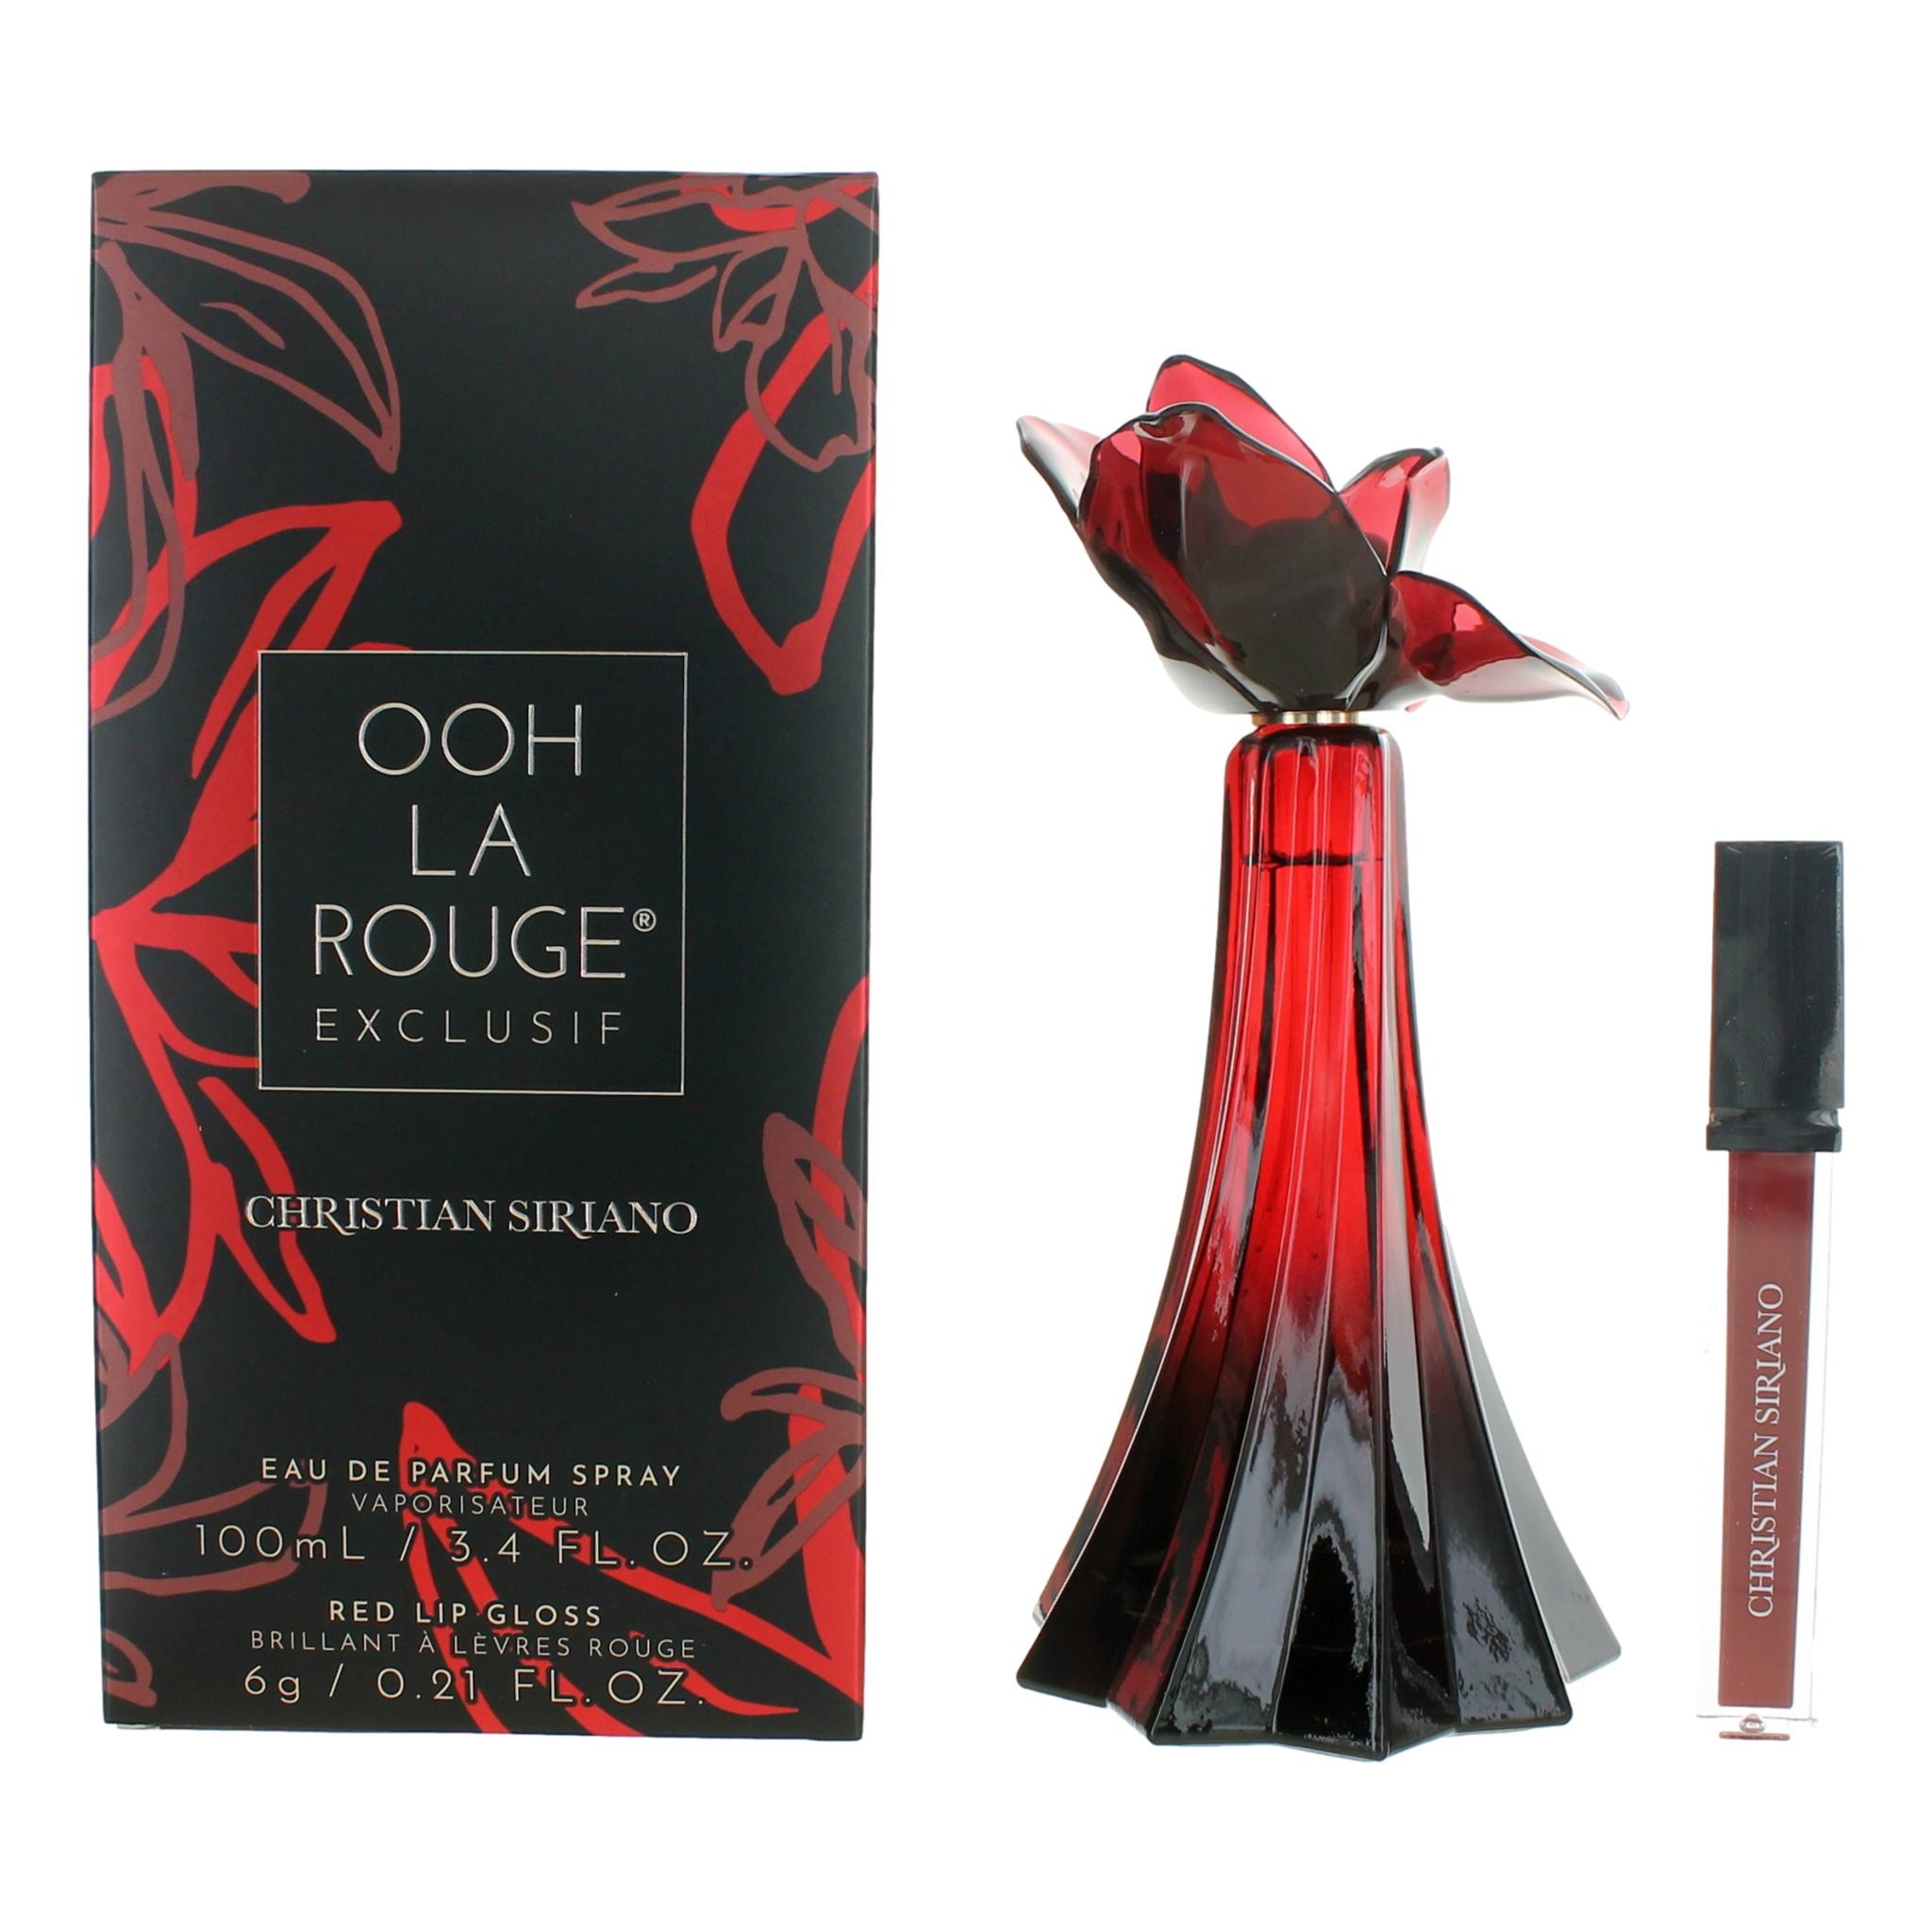 Ooh La Rouge Exclusif by Christian Siriano 3.4 oz Eau De Parfum Spray for Women with Lip Gloss